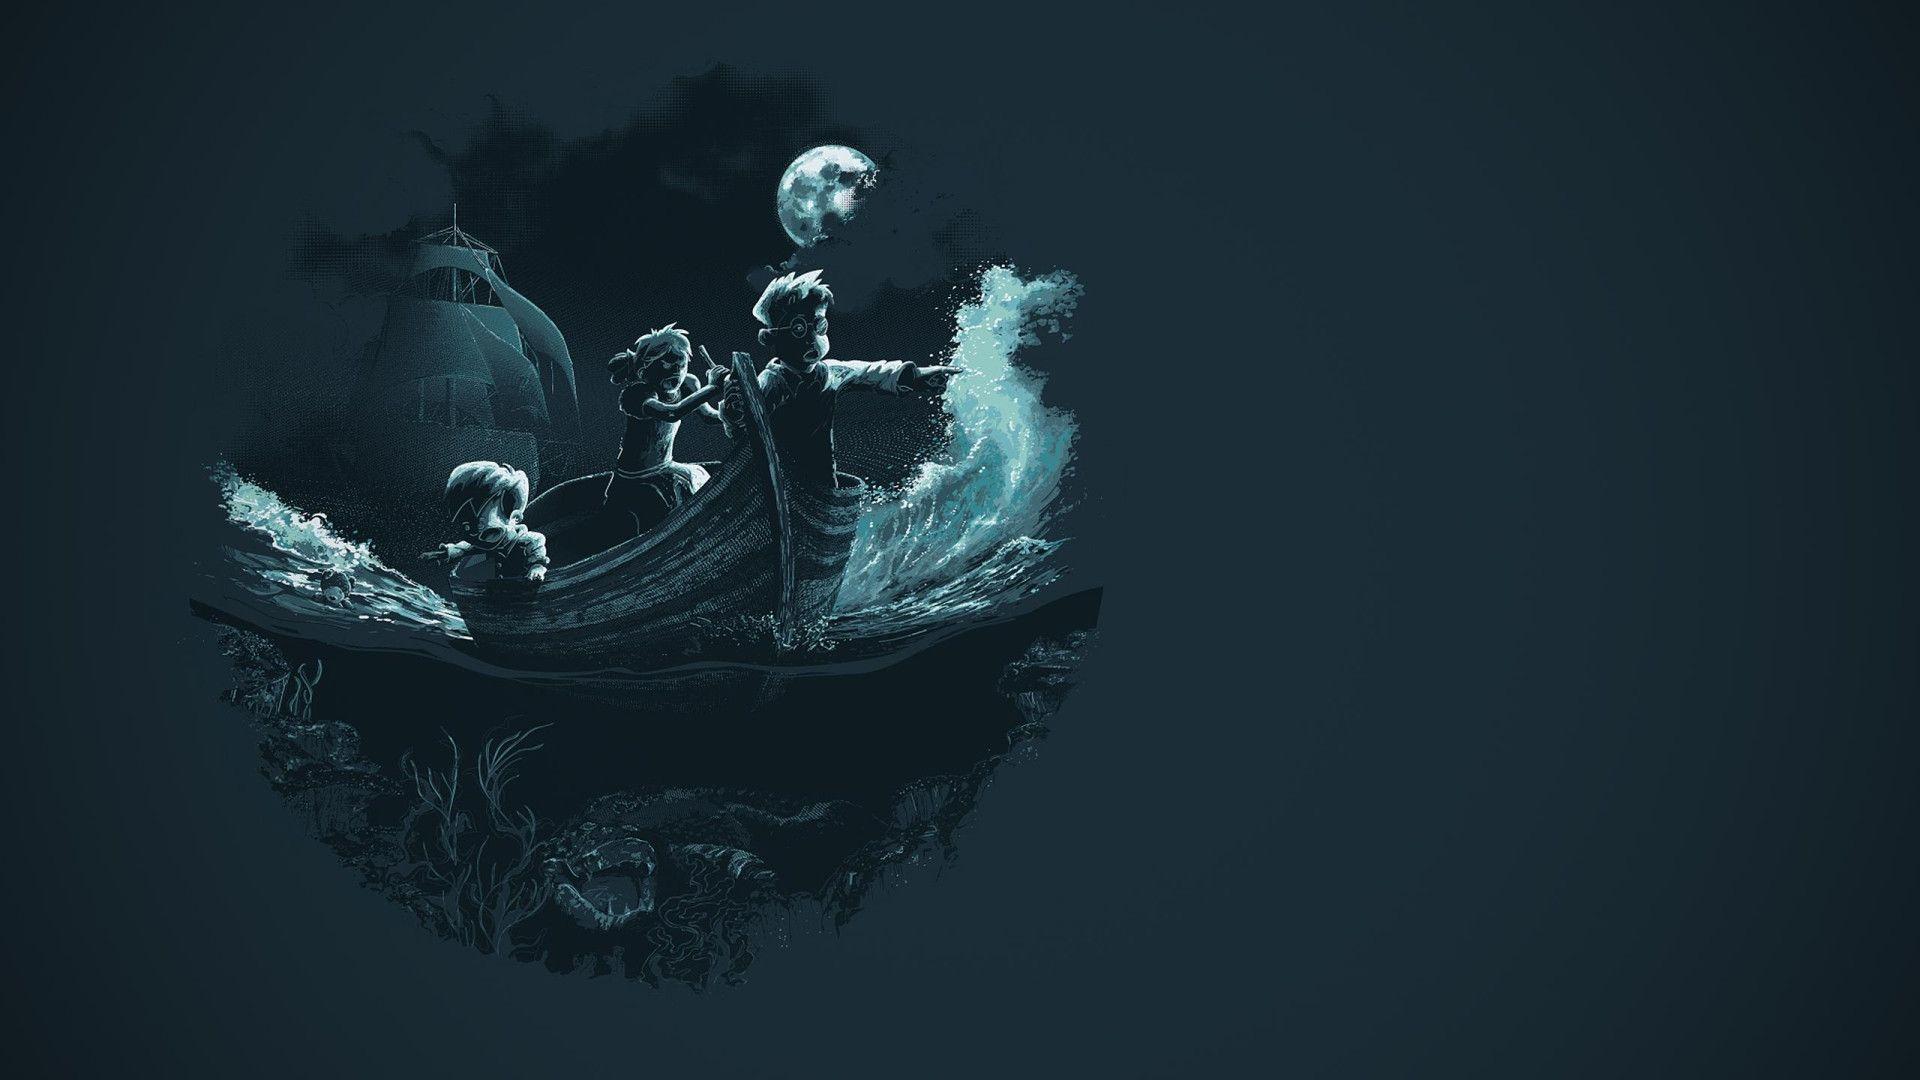 Escape From Neverland Wallpaper. Escape From Neverland Background